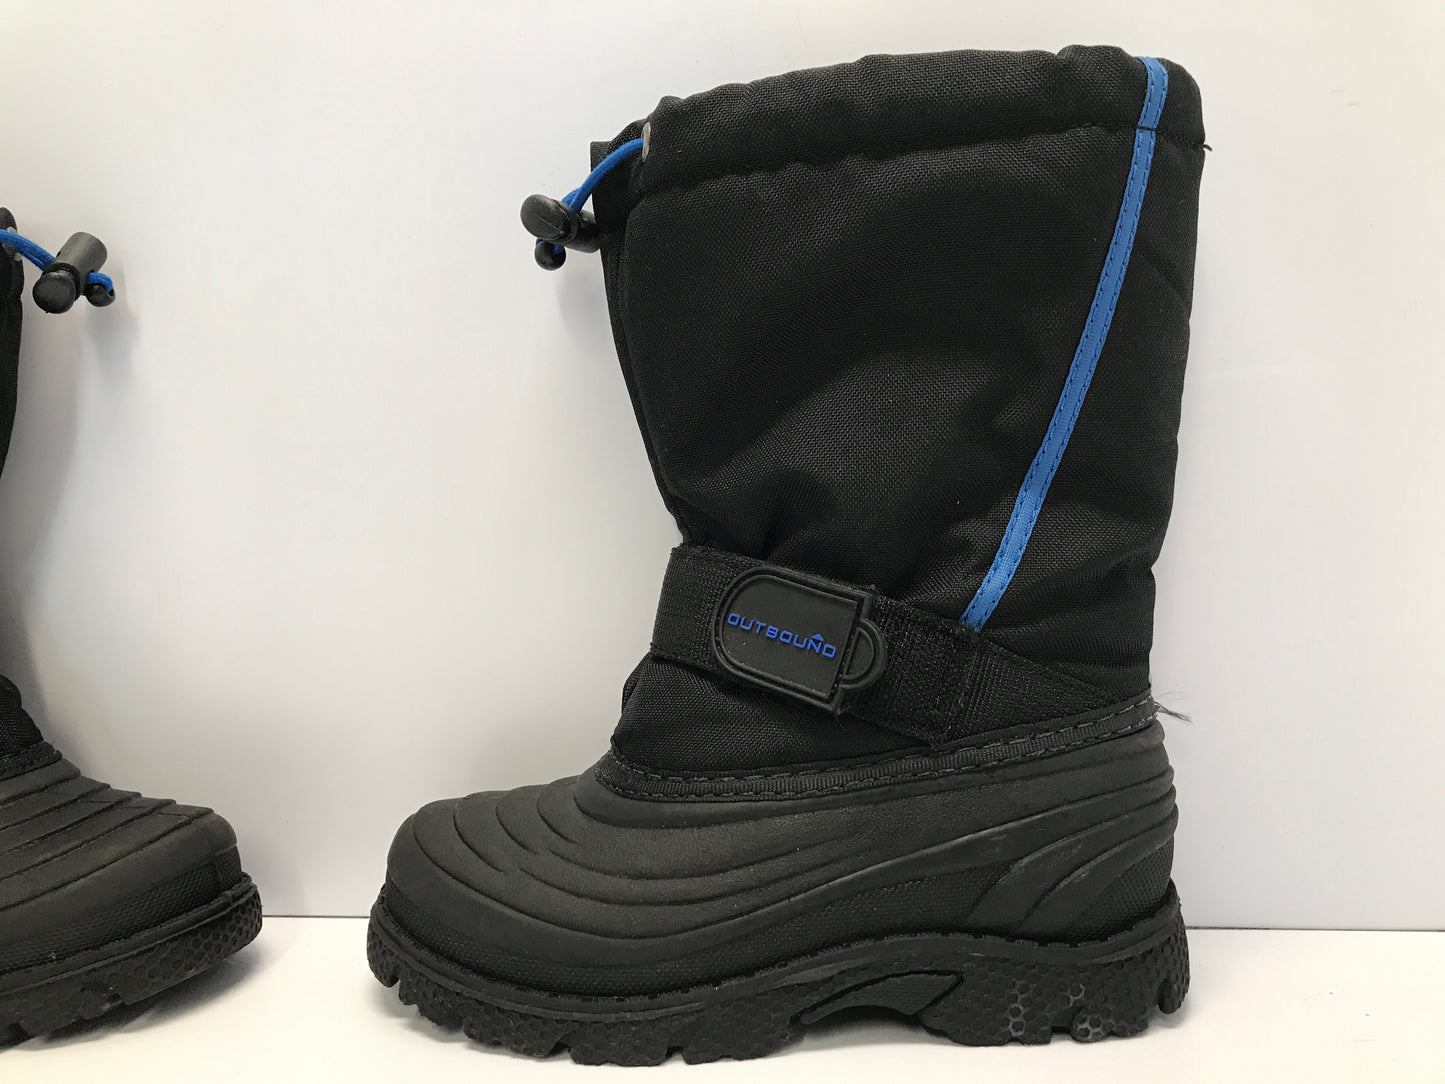 Winter Boots Child Size 13 Outbound With Liner Like New Black Blue